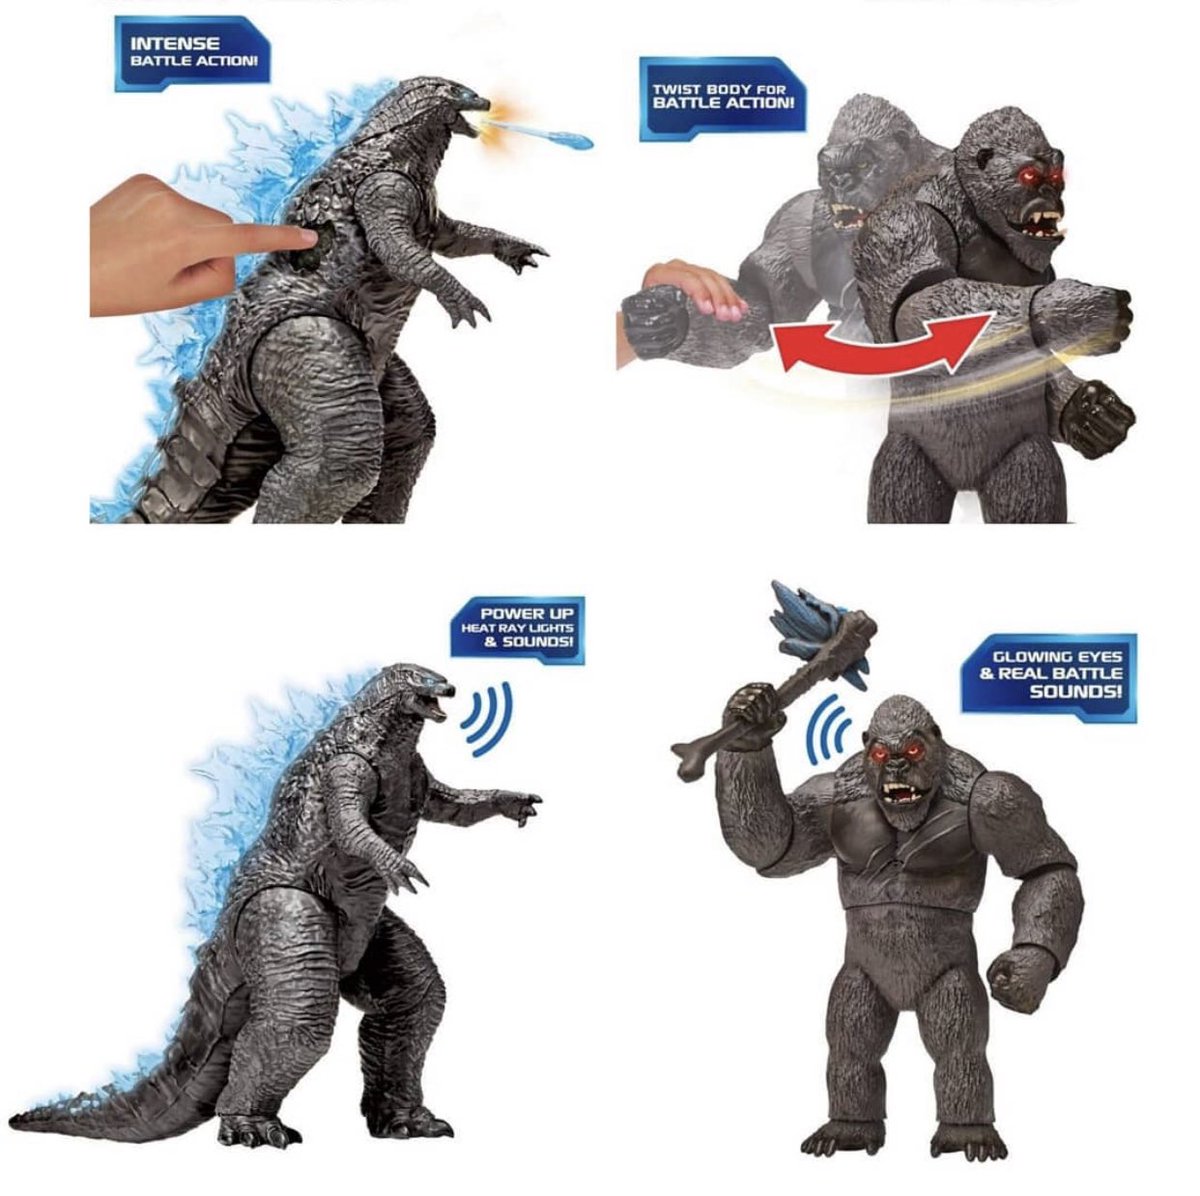 Miregoji326 On Twitter New Godzillavskong Mega Heat Ray Godzilla And Mega Punching Kong Playmates Figures Looks Like They Re 13 Inches And Have Really Battle Sounds And Buttons Https T Co H5m3ththjy